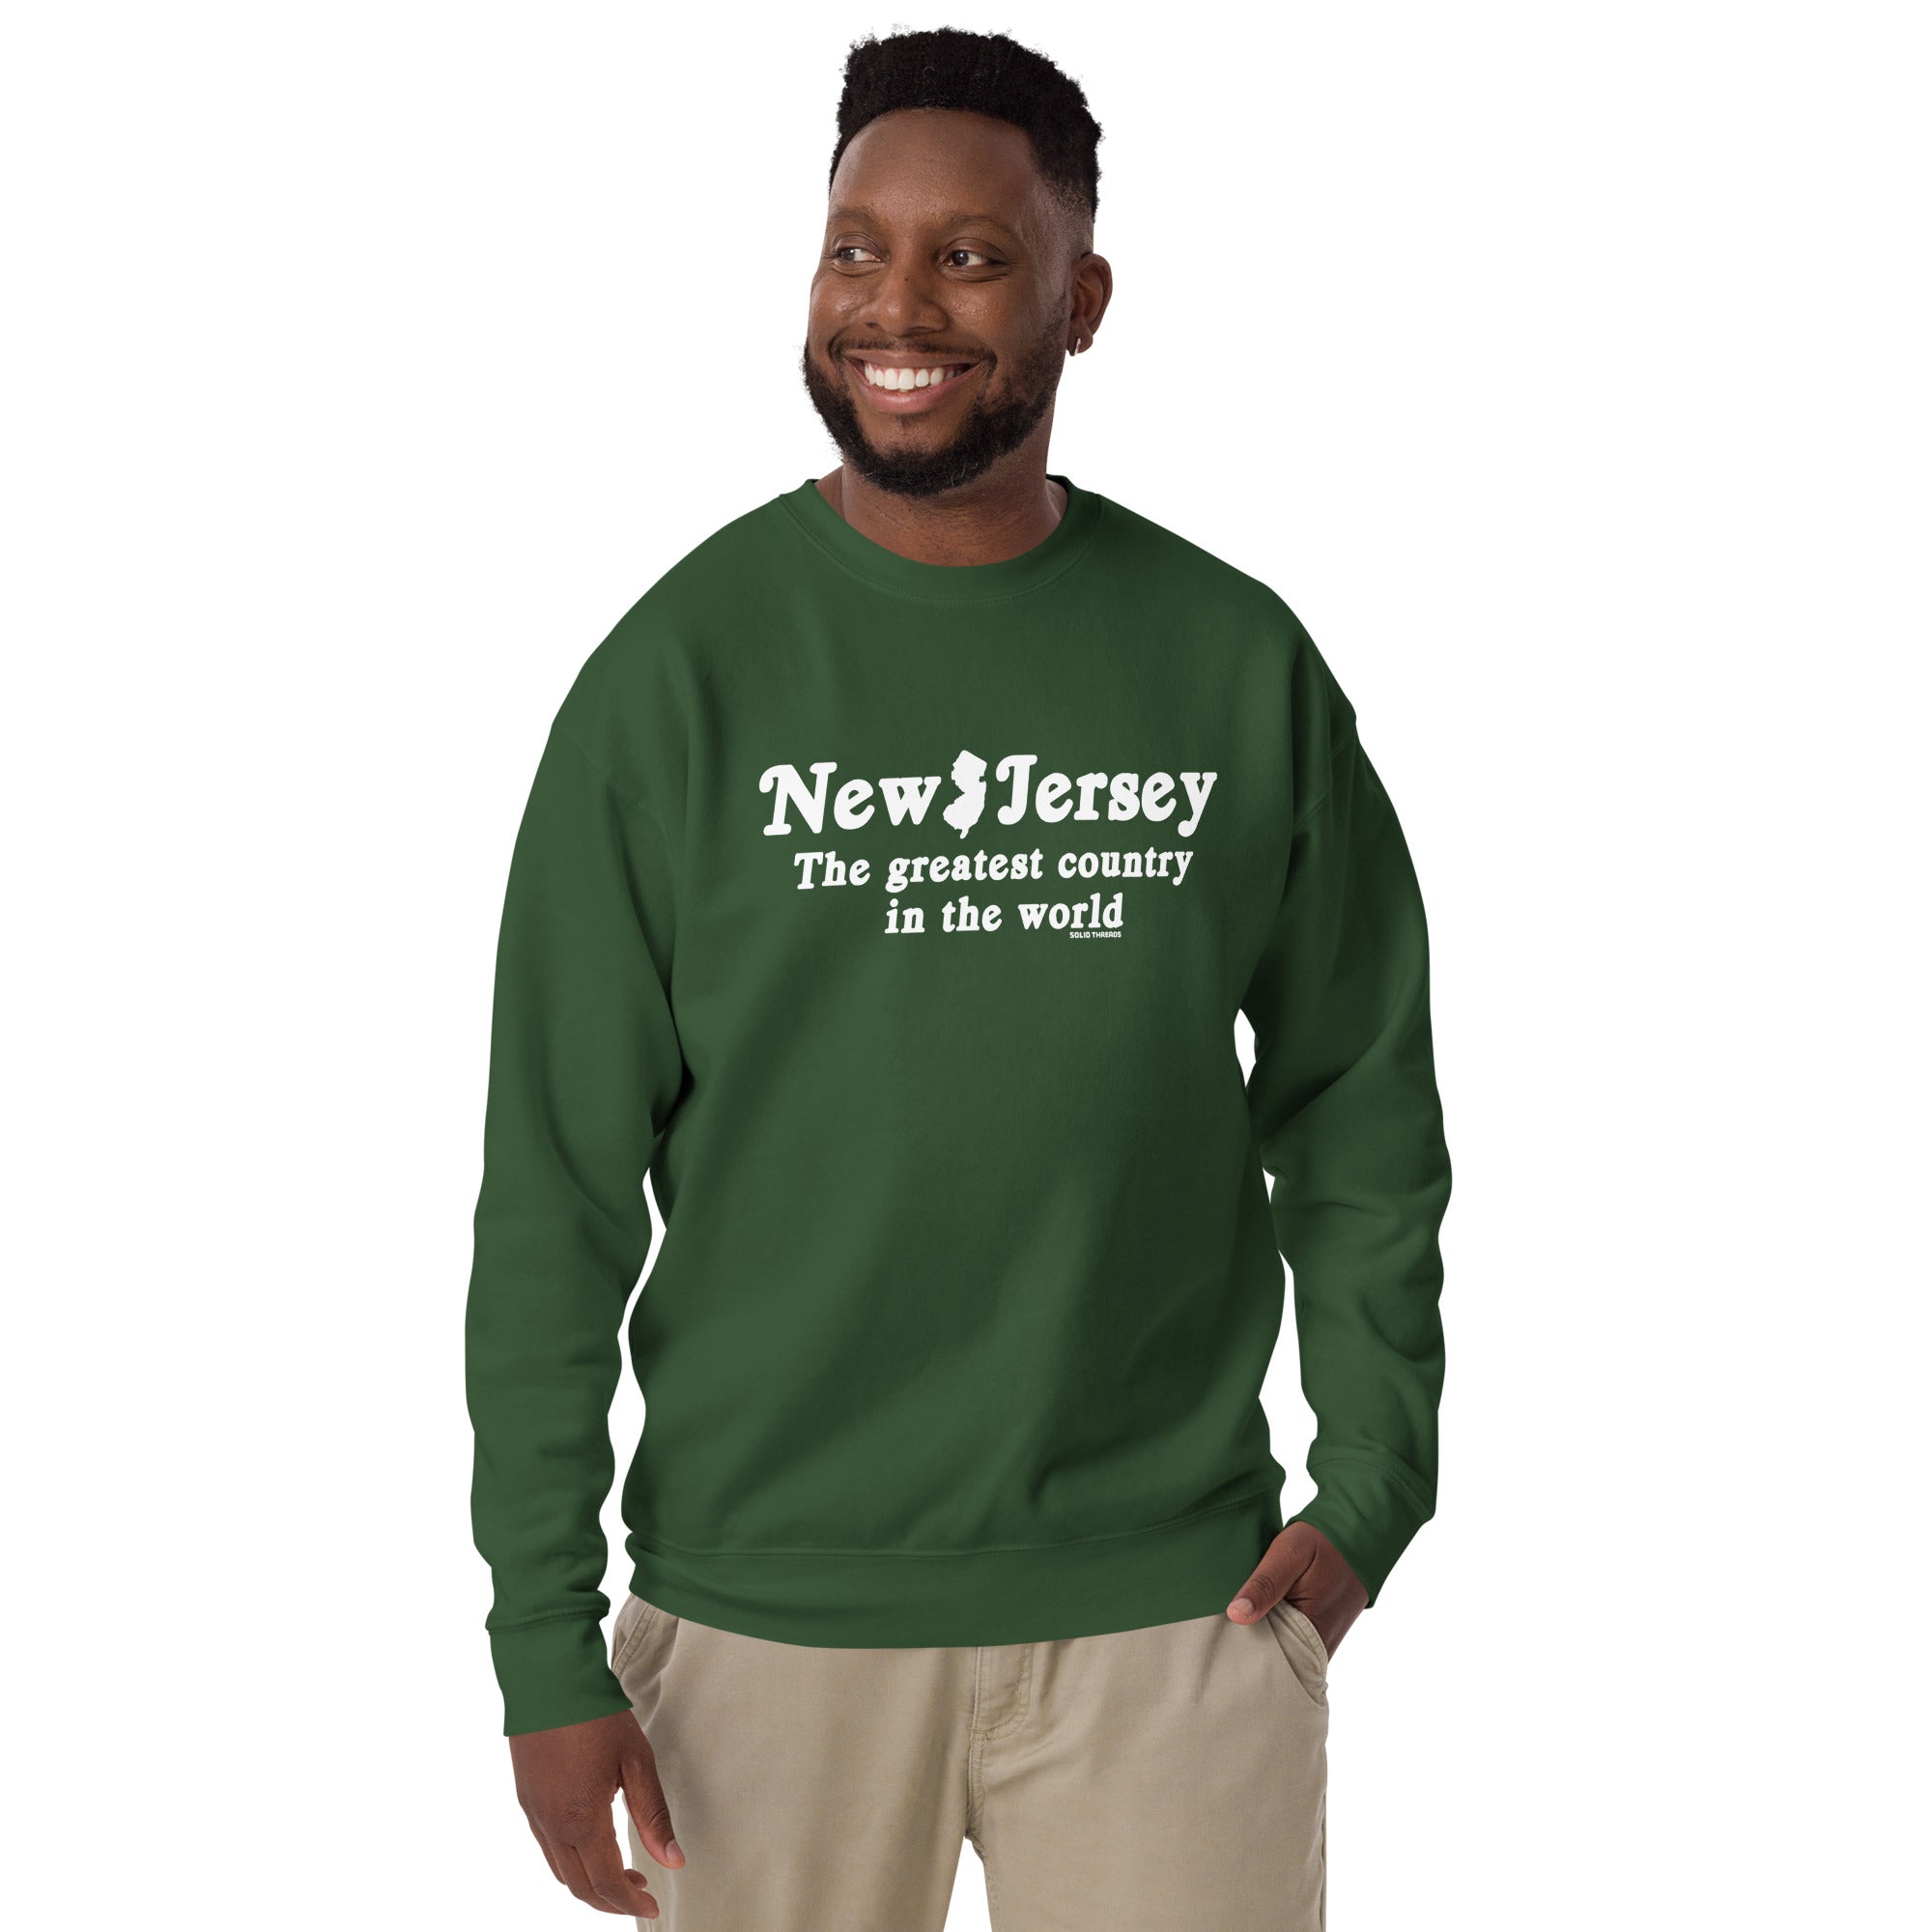 New Jersey The Greatest Country In The World Vintage Classic Sweatshirt | Funny Garden State Fleece on Model | Solid Threads